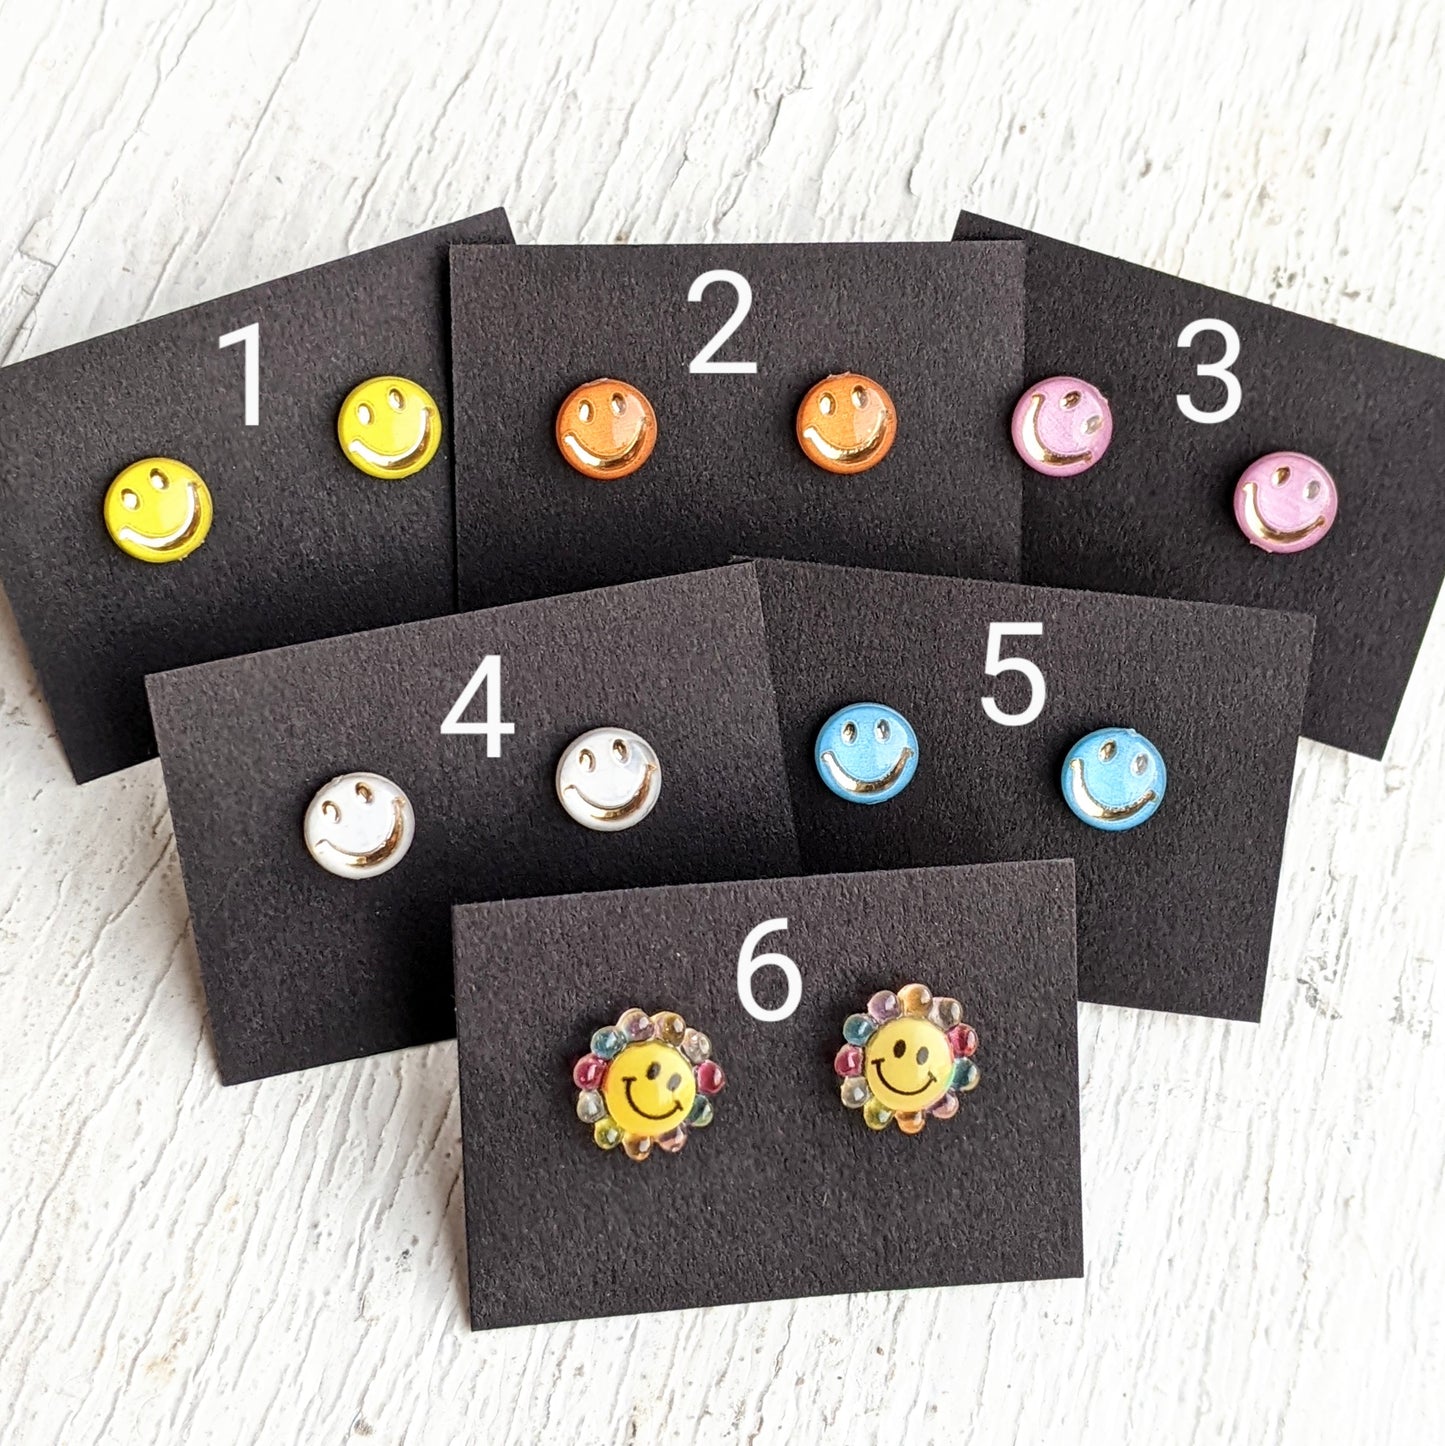 Smiley Stud Earring Collection